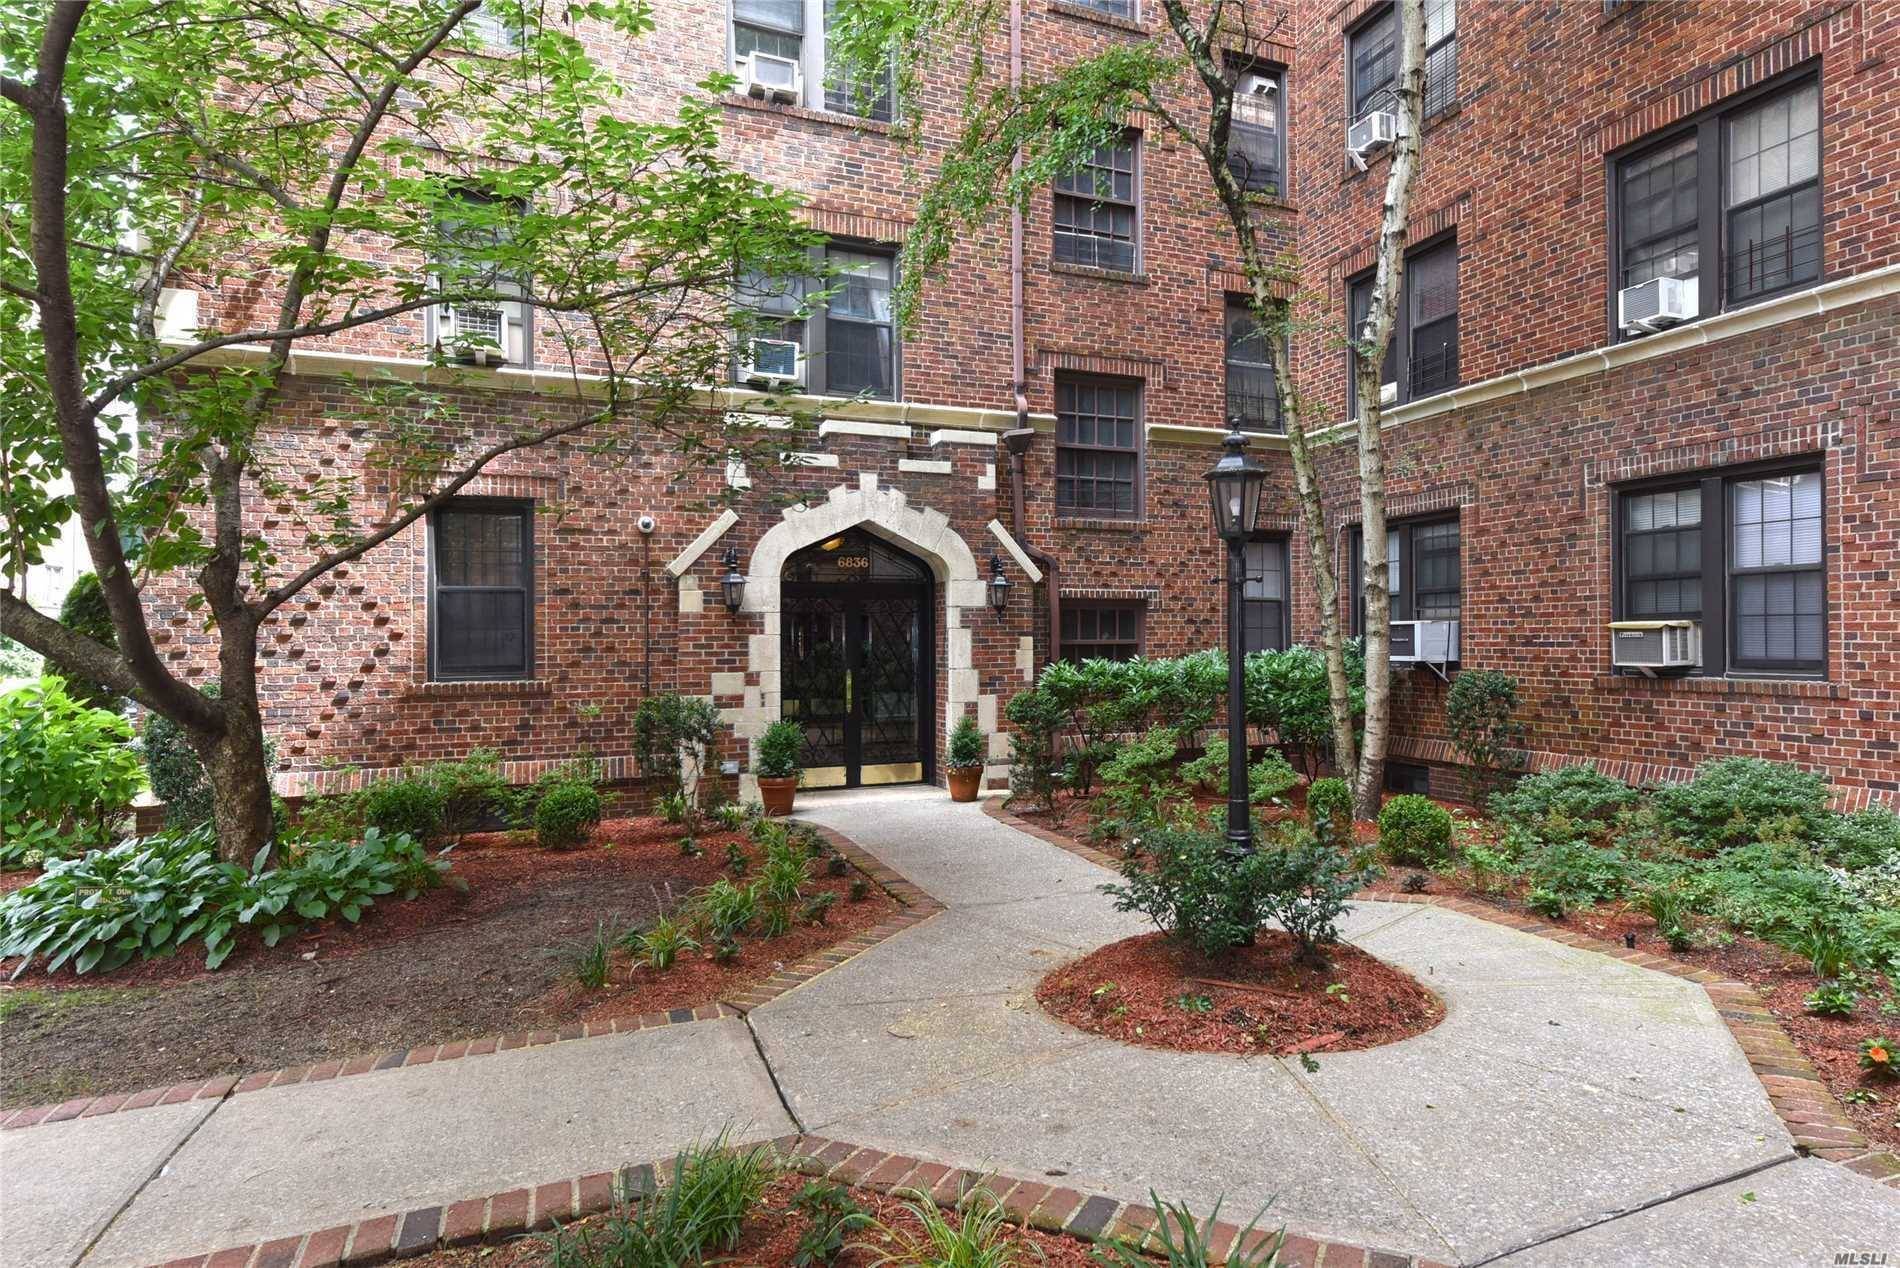 Feast Your Eyes On This Absolutely Gorgeous 2 Bedroom, 1 Bath In The Heart of Forest Hills.